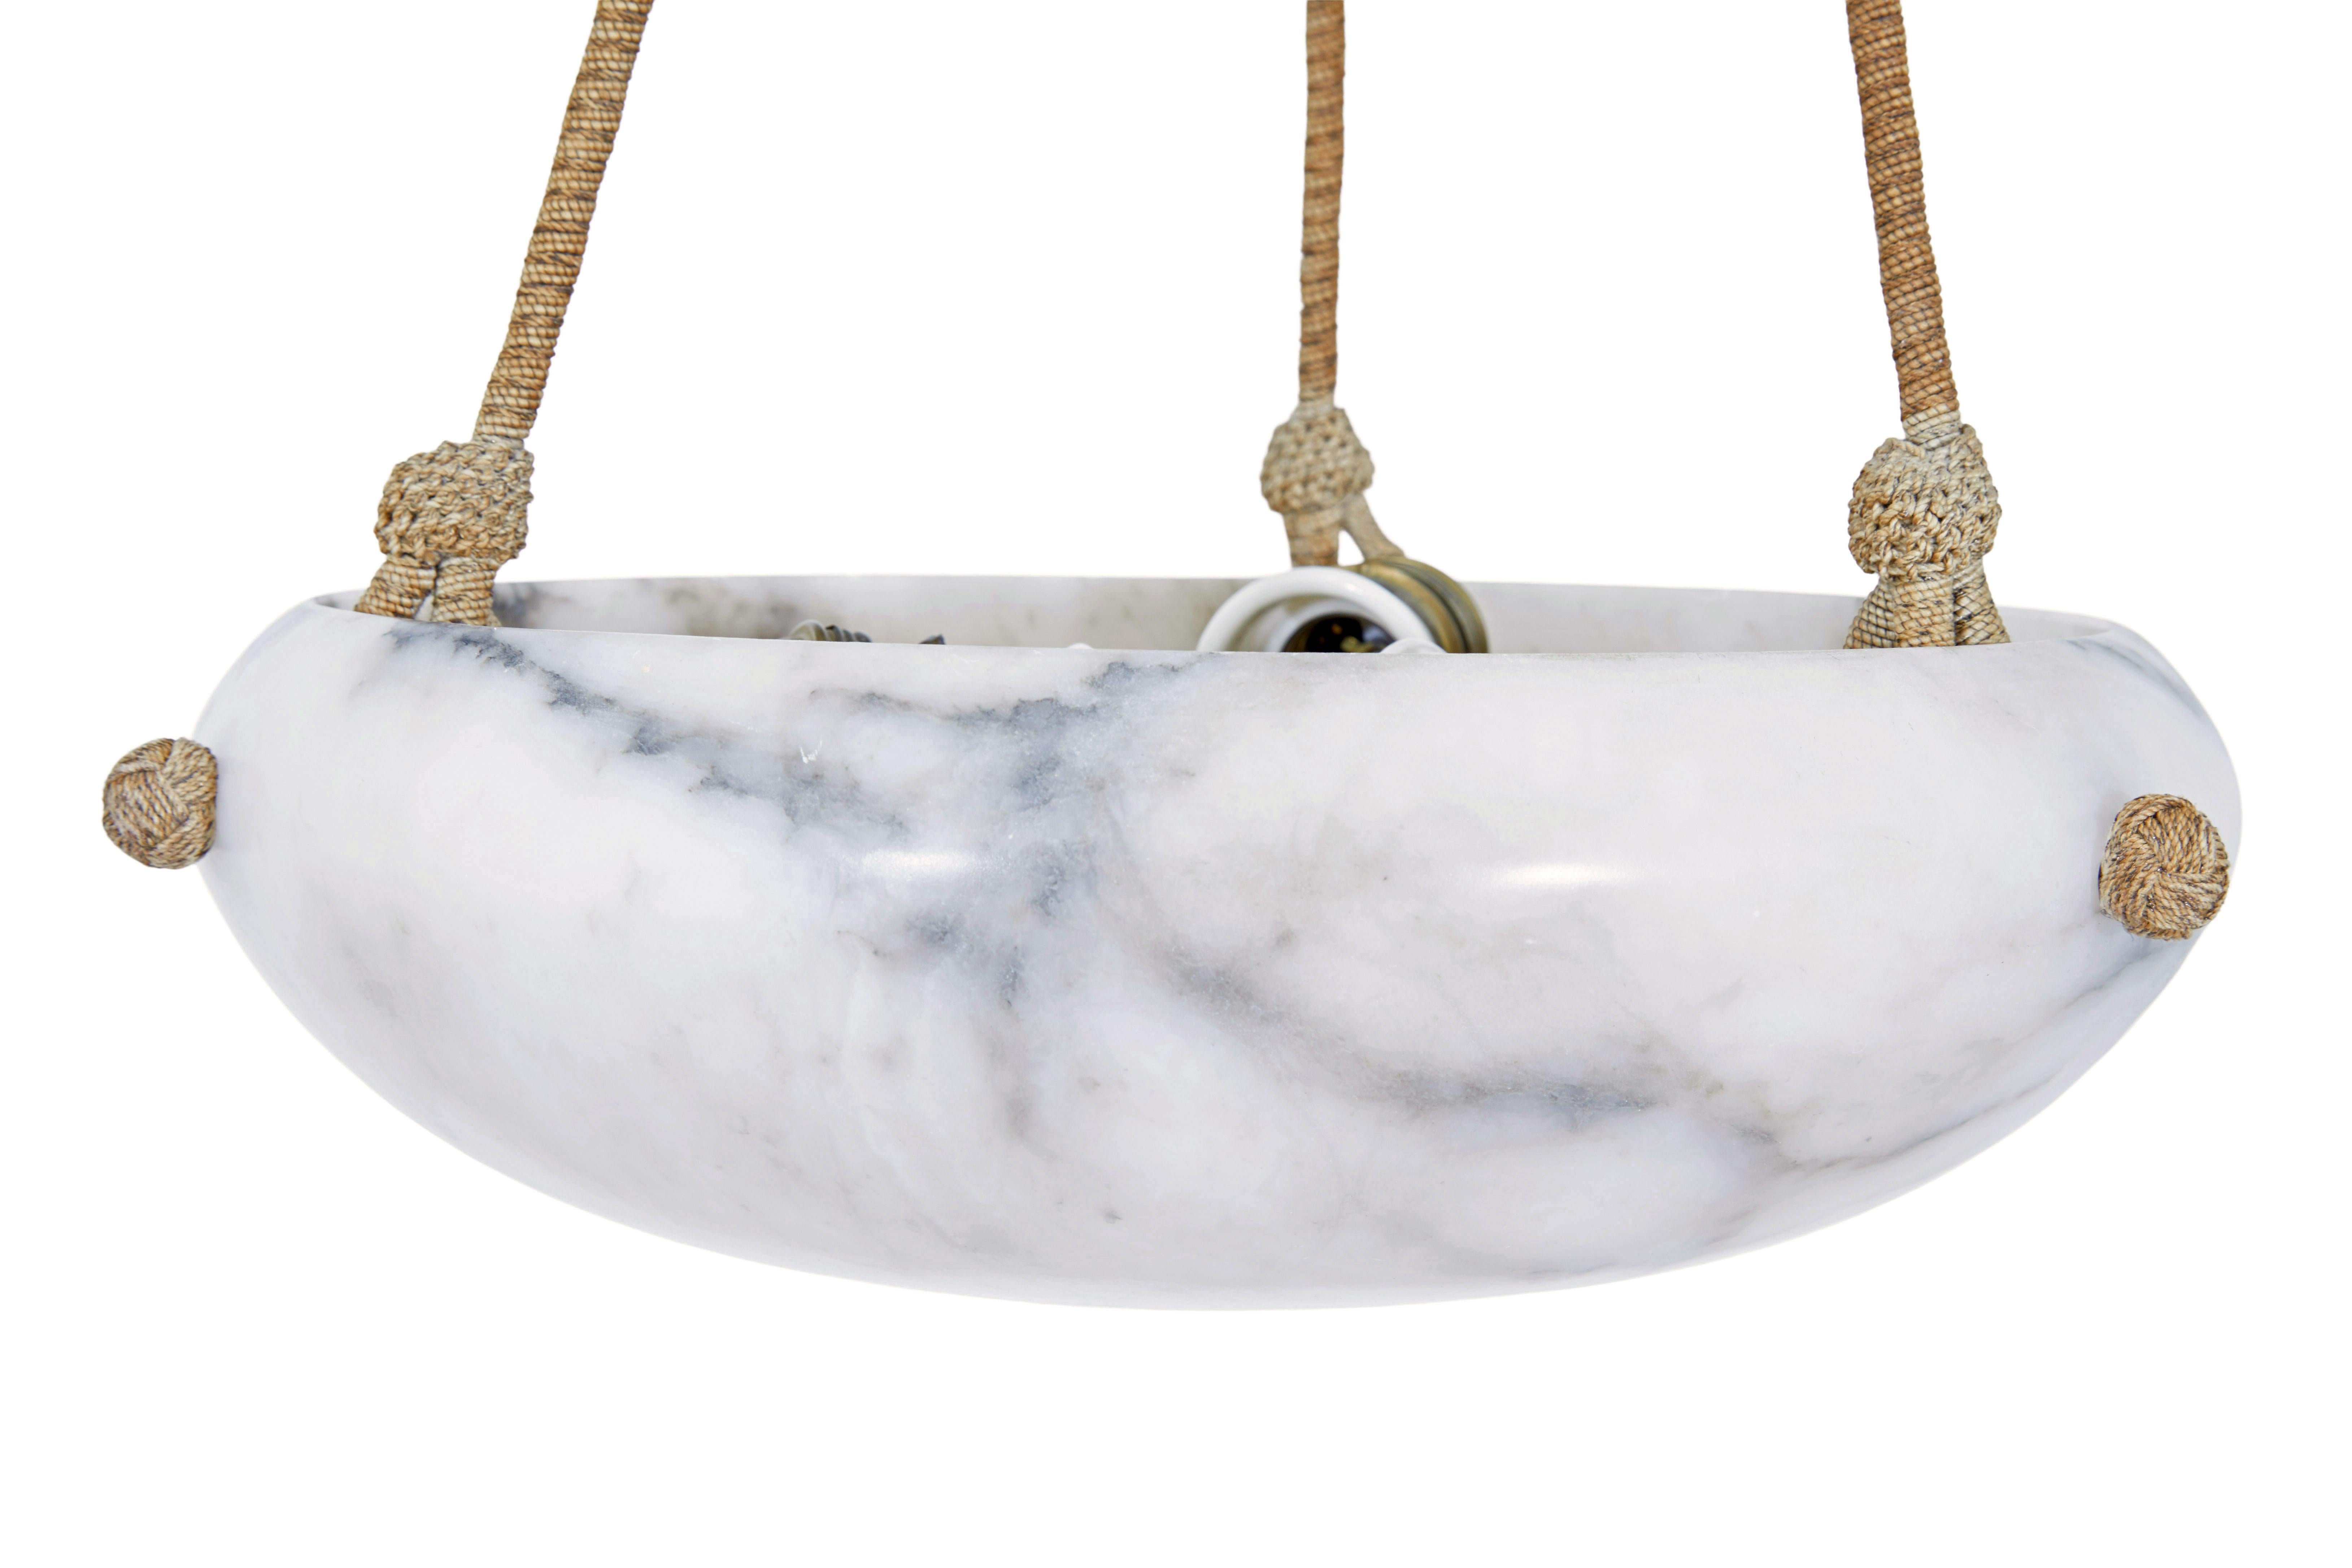 Art Deco grey and white alabaster pendant light circa 1930.

Fine quality circular hanging pendant light. Good sized alabaster dish that lends itself to being used in many rooms around the home.

Grey/white colour with darker grey veining. Light